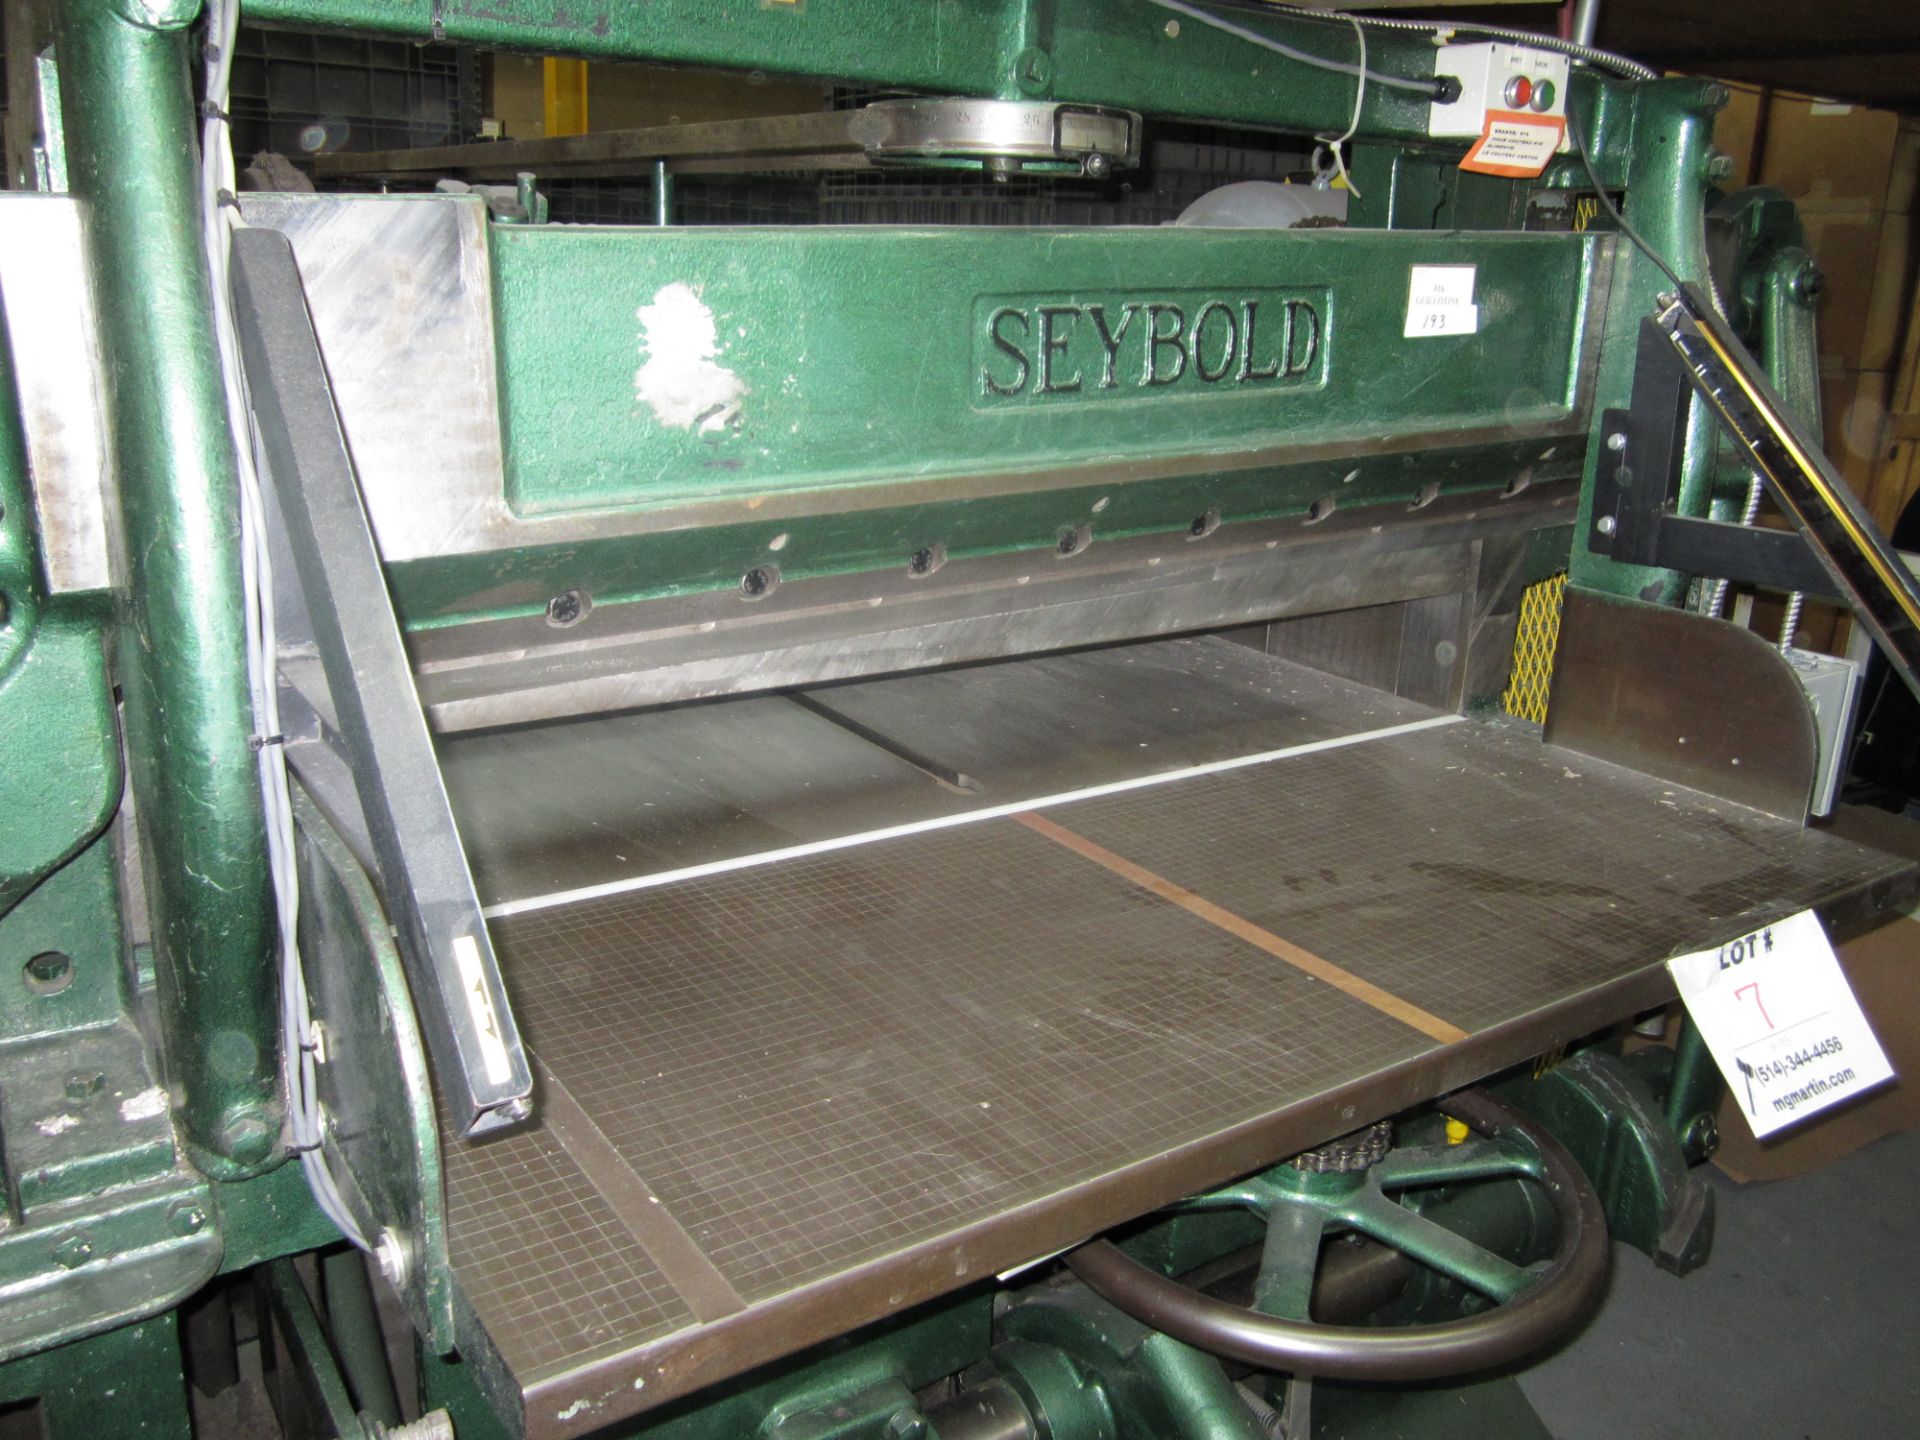 SEYBOLD 52'' MANUAL GUILLOTINE MODIFIED FOR SECURITY + ELECTRONIC SAFETY BARS - Image 3 of 3